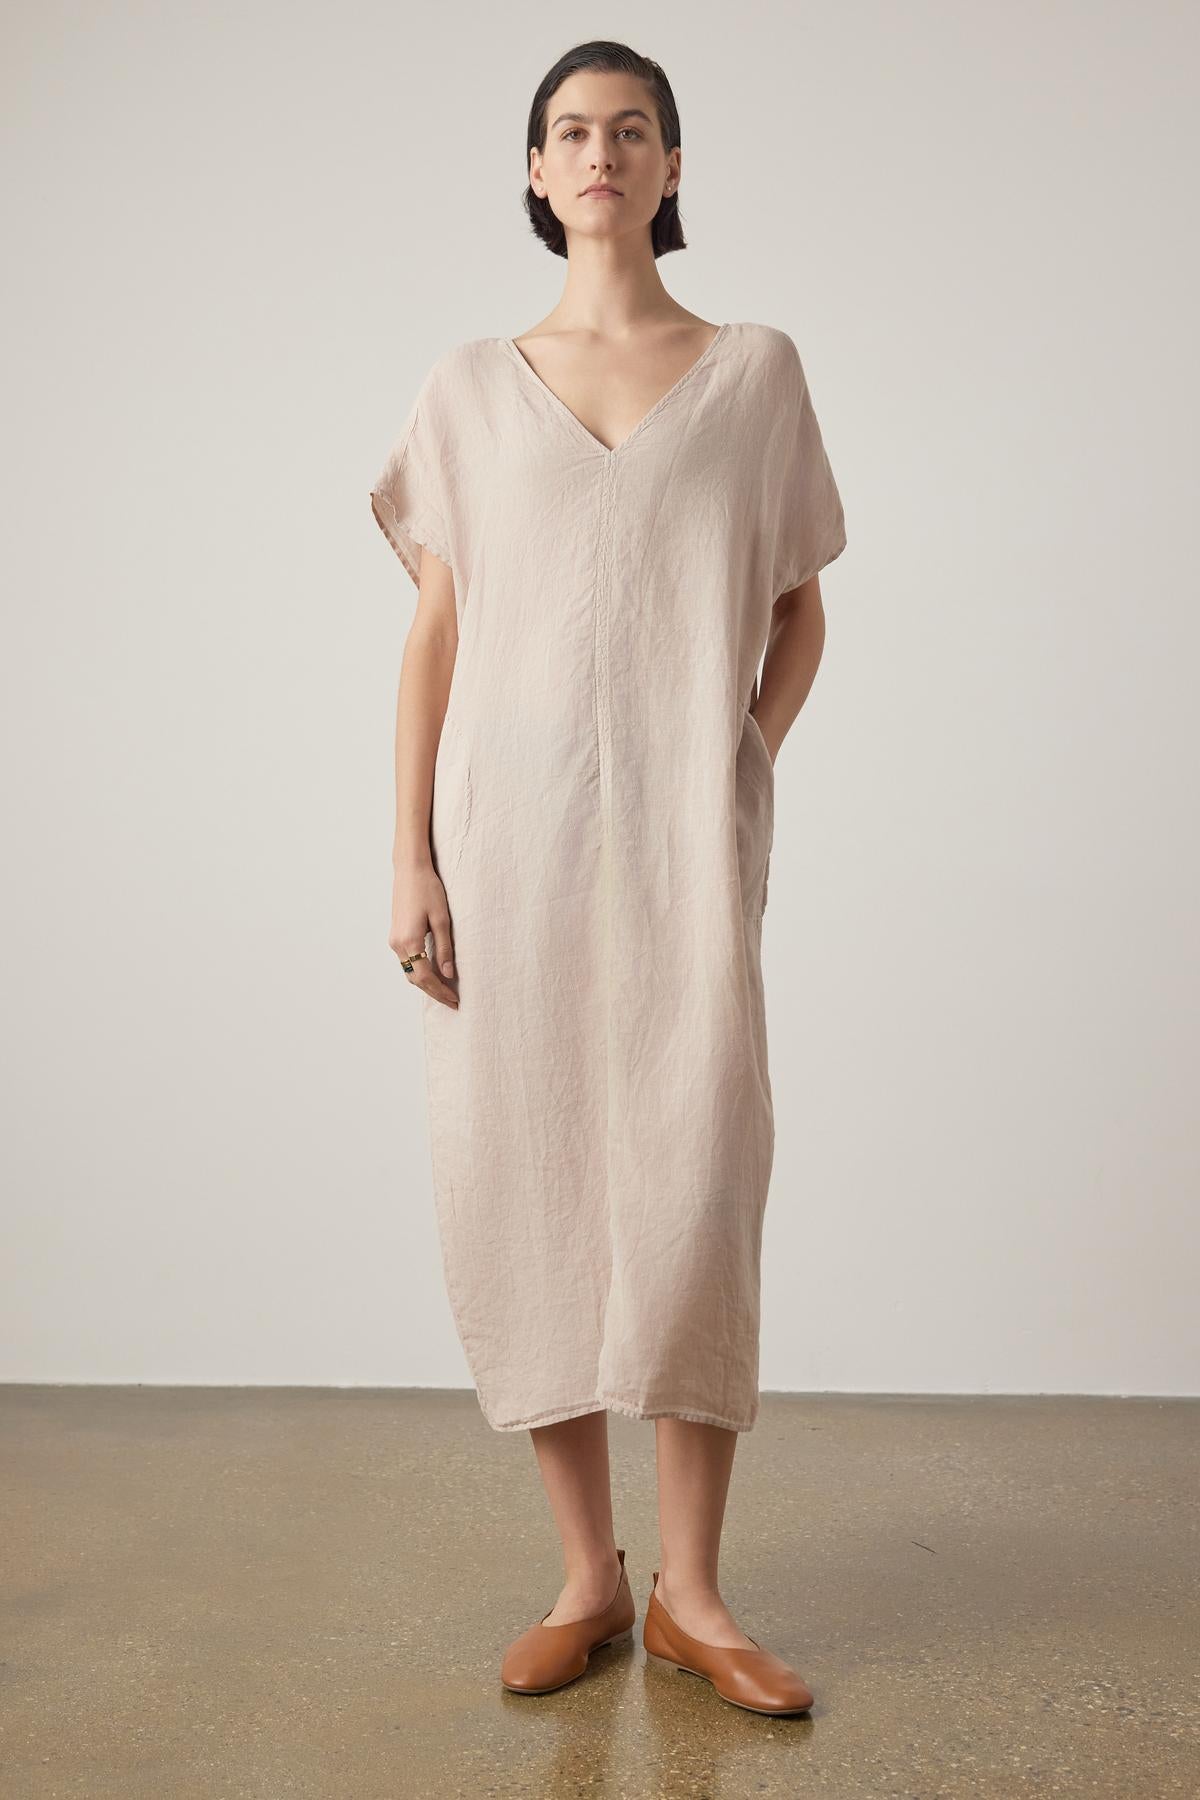 A woman stands facing forward, wearing a Velvet by Jenny Graham Montana linen dress with a V neckline and brown slip-on shoes, against a neutral backdrop.-36863315214529